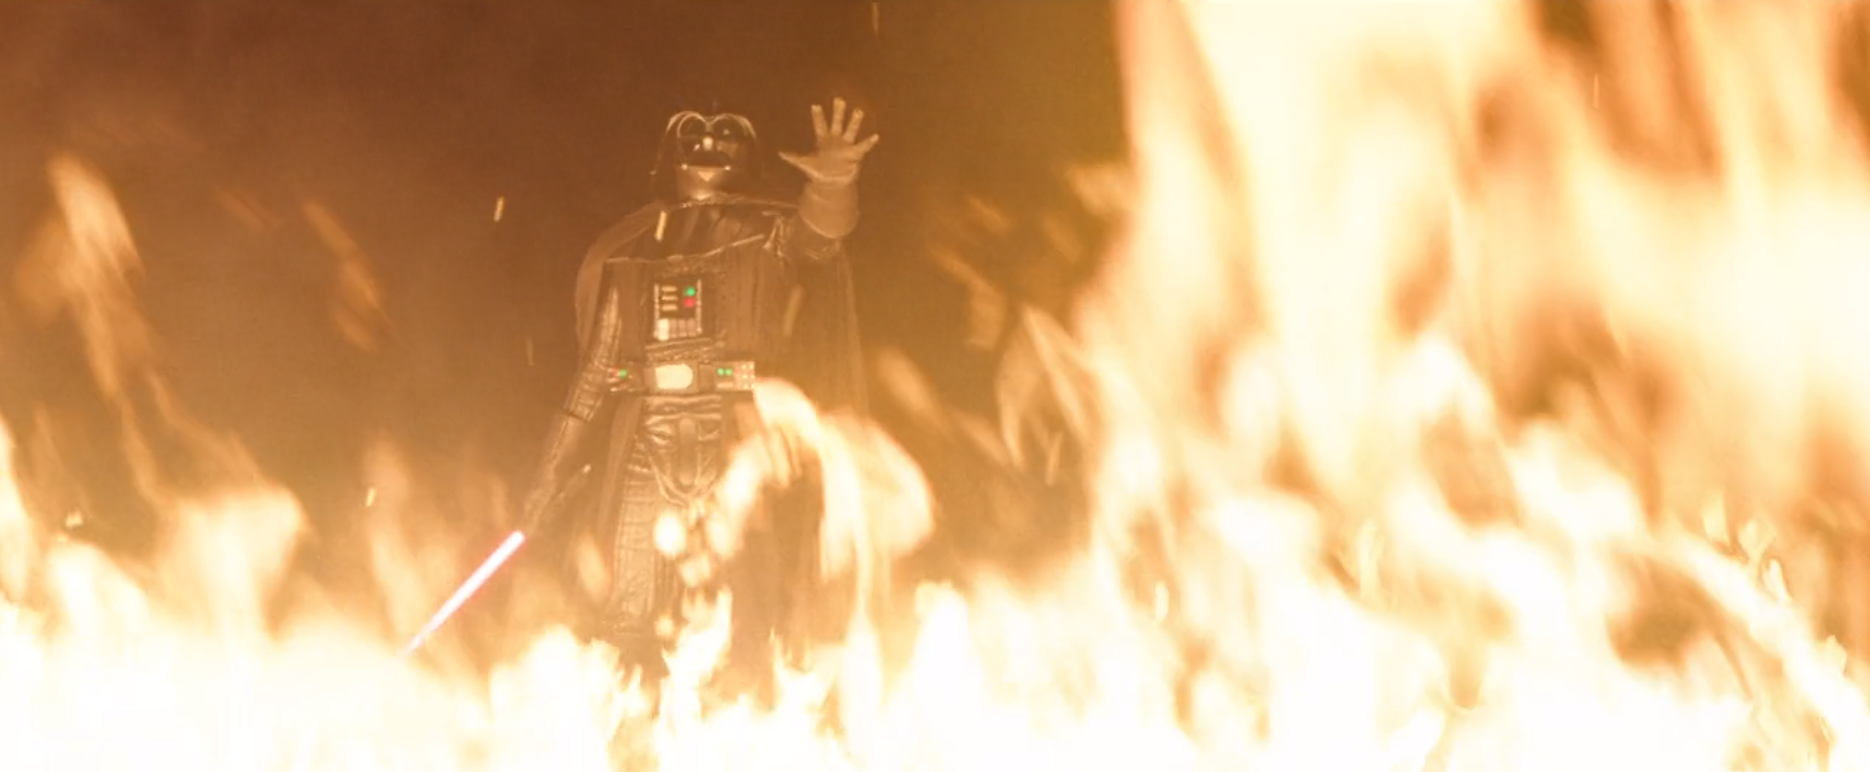 Image of Darth Vader using the force behind flames